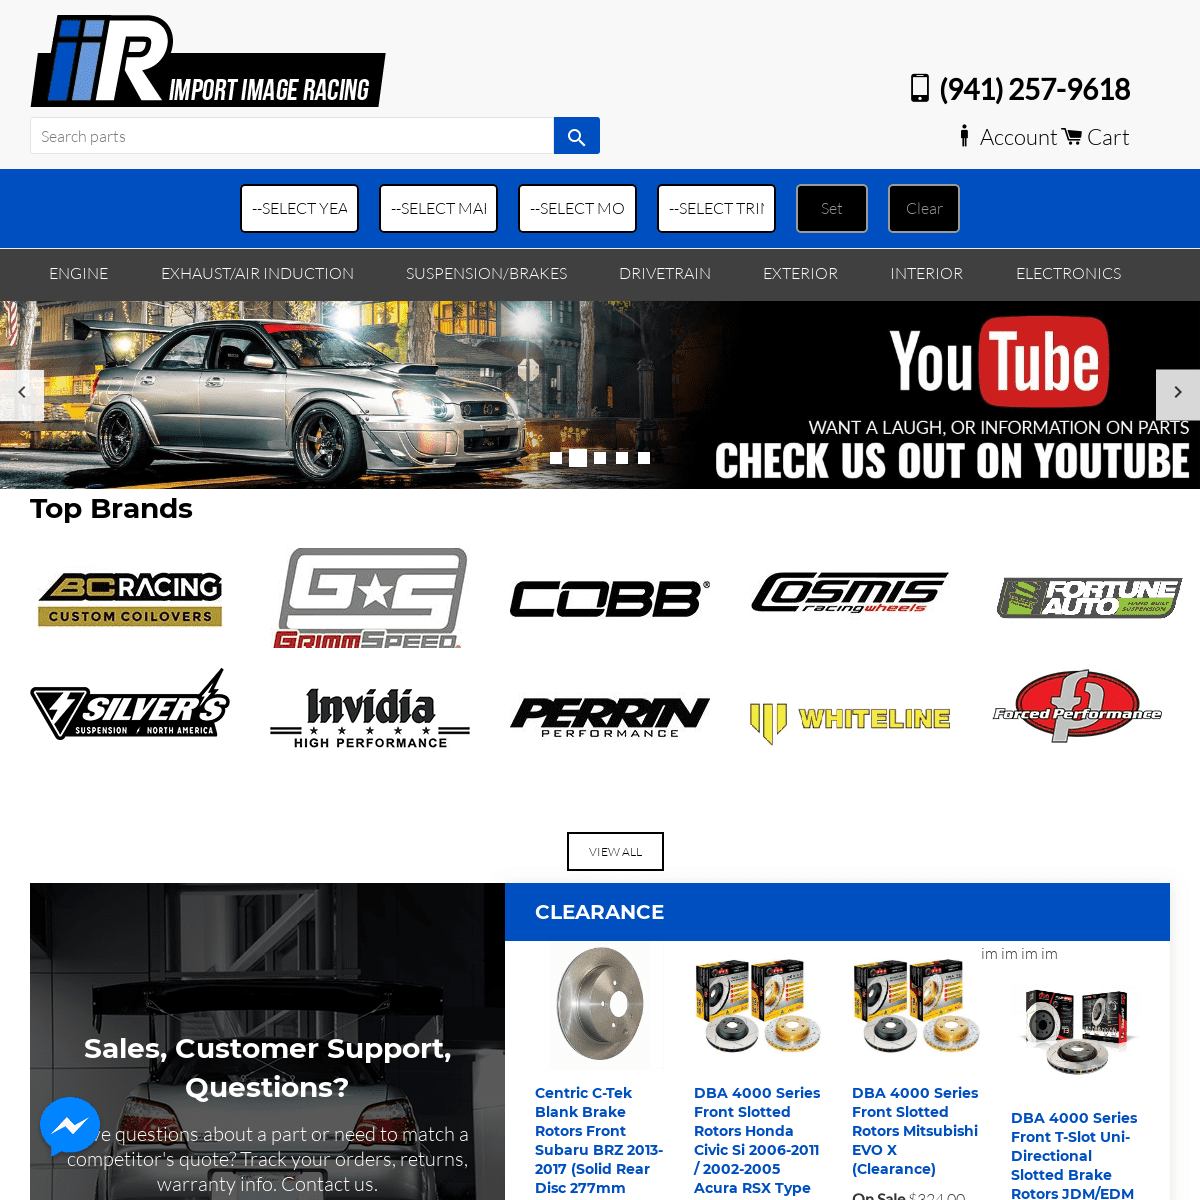 A complete backup of importimageracing.com